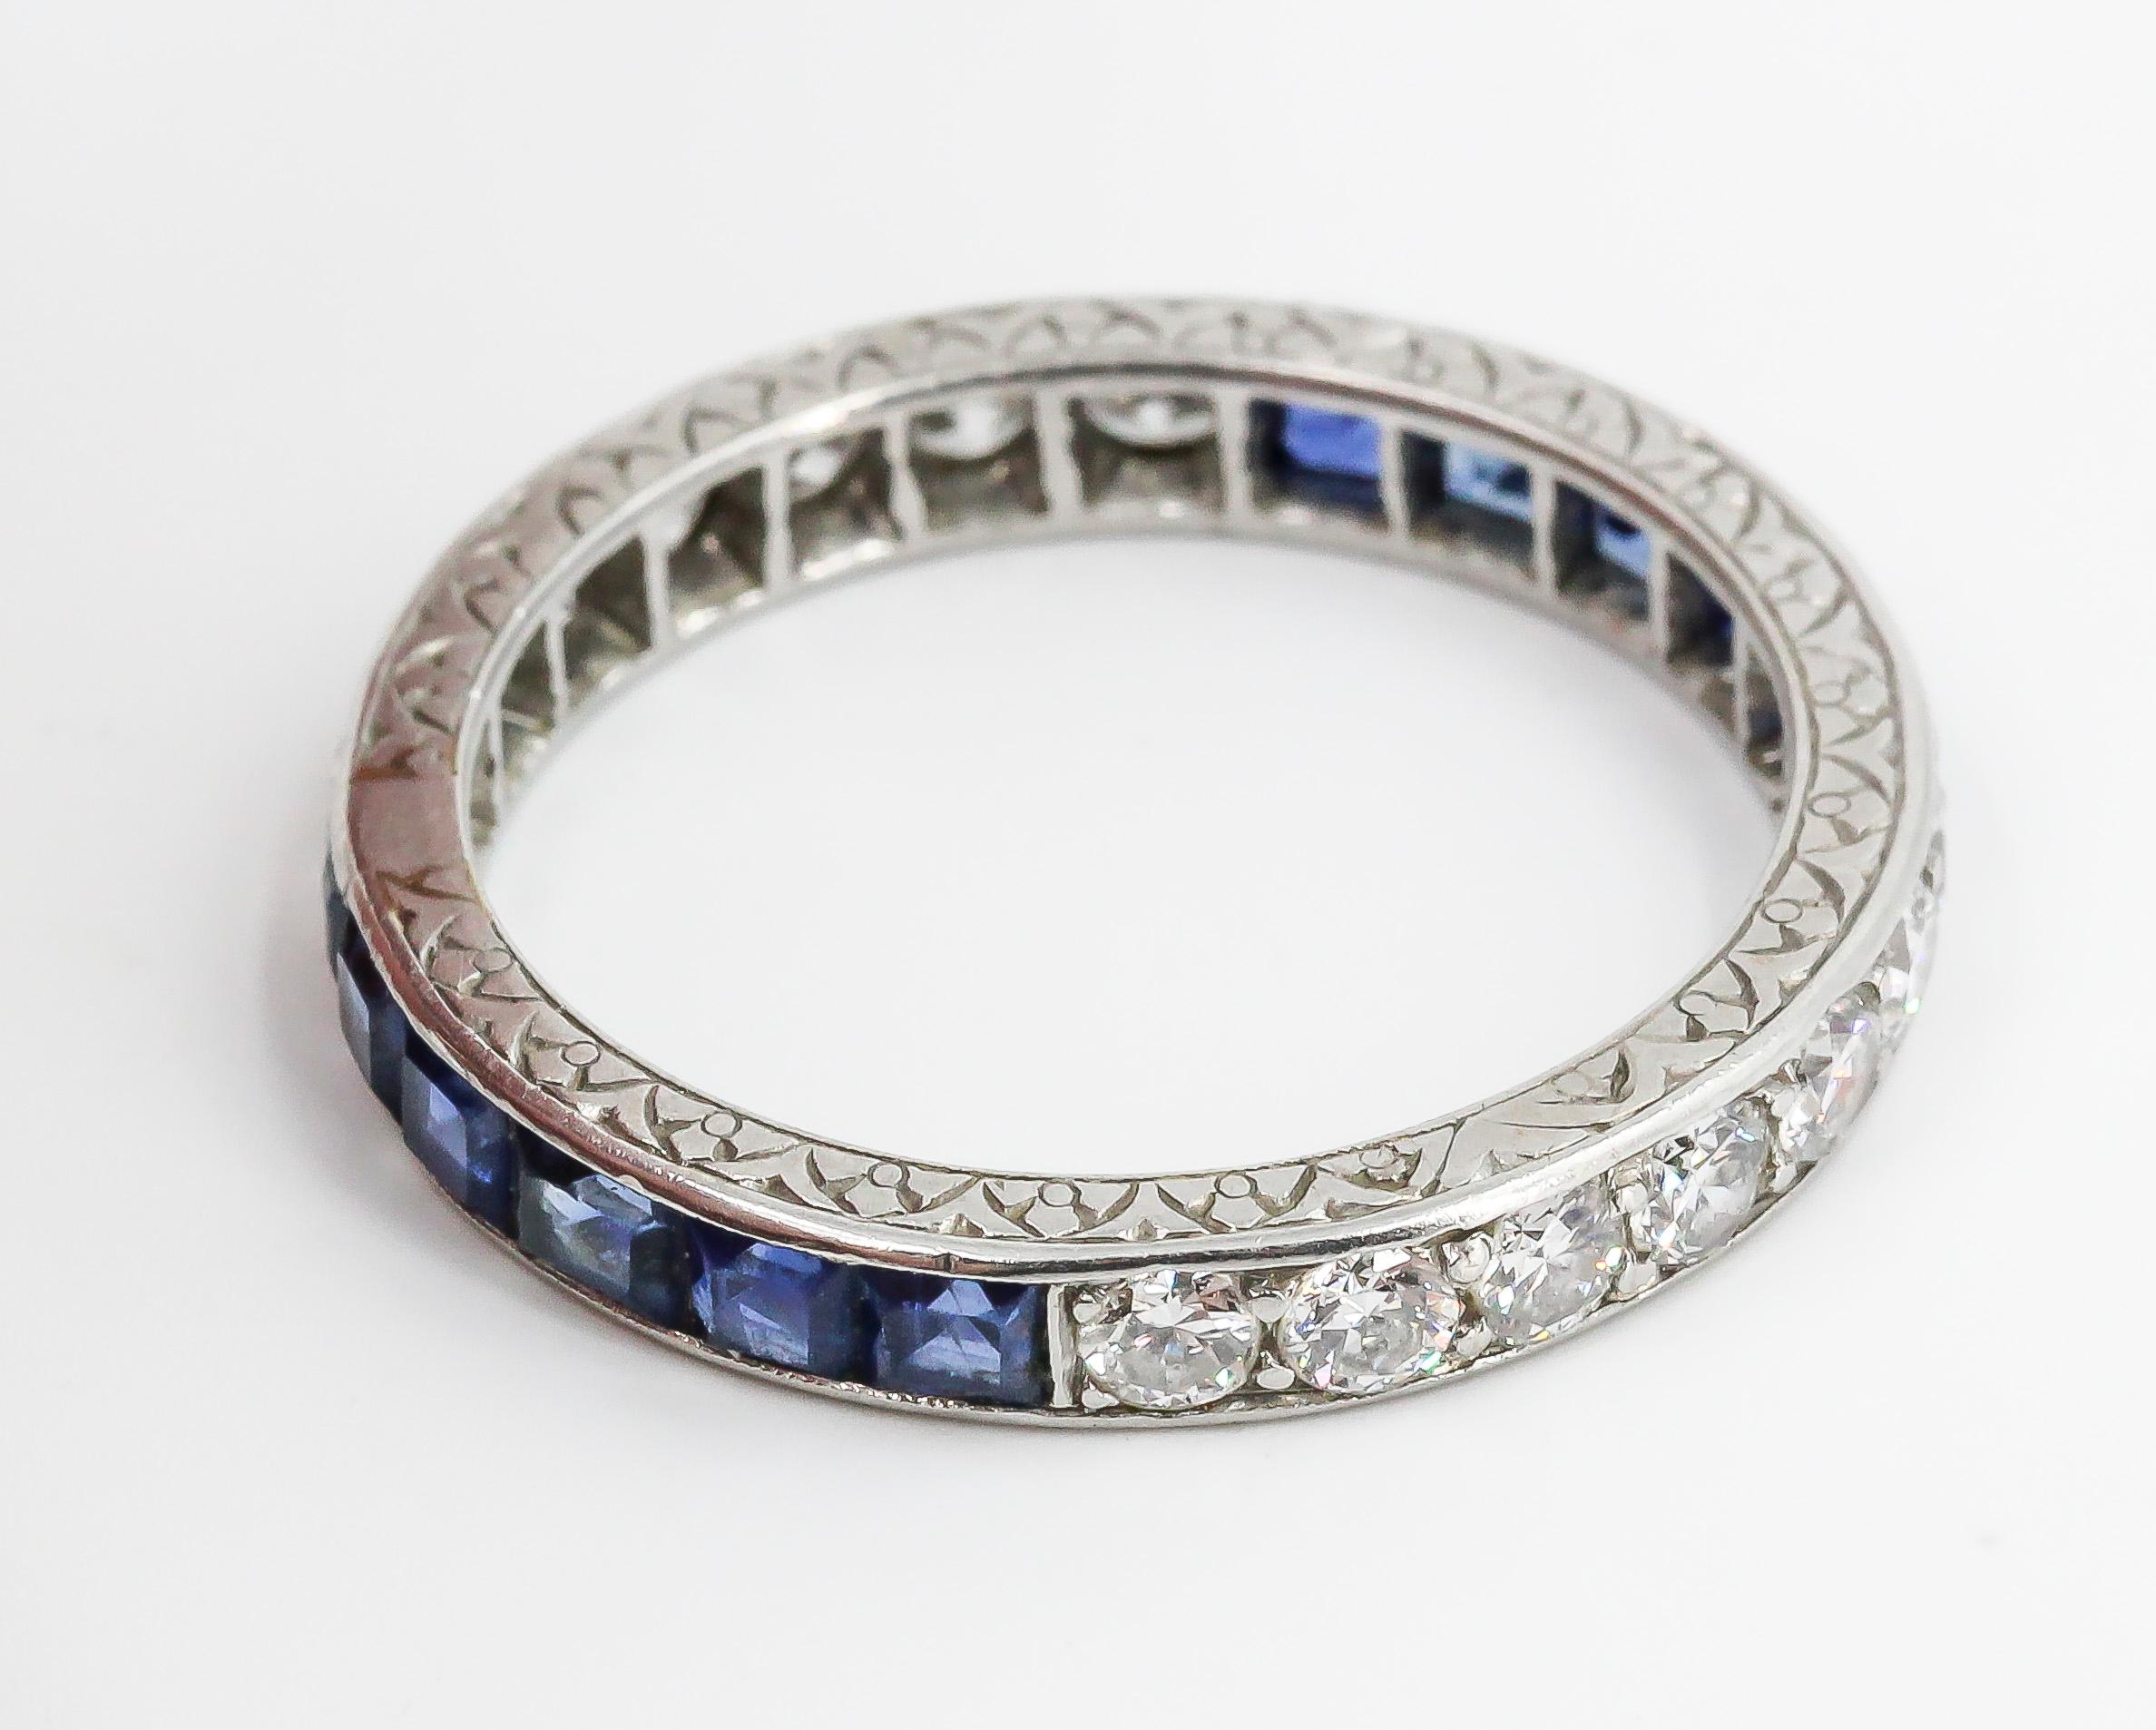 Chic sapphire, diamond and platinum large band, circa 1920s. It features rich blue sapphires and high grade round brilliant cut diamonds. US size 9.

